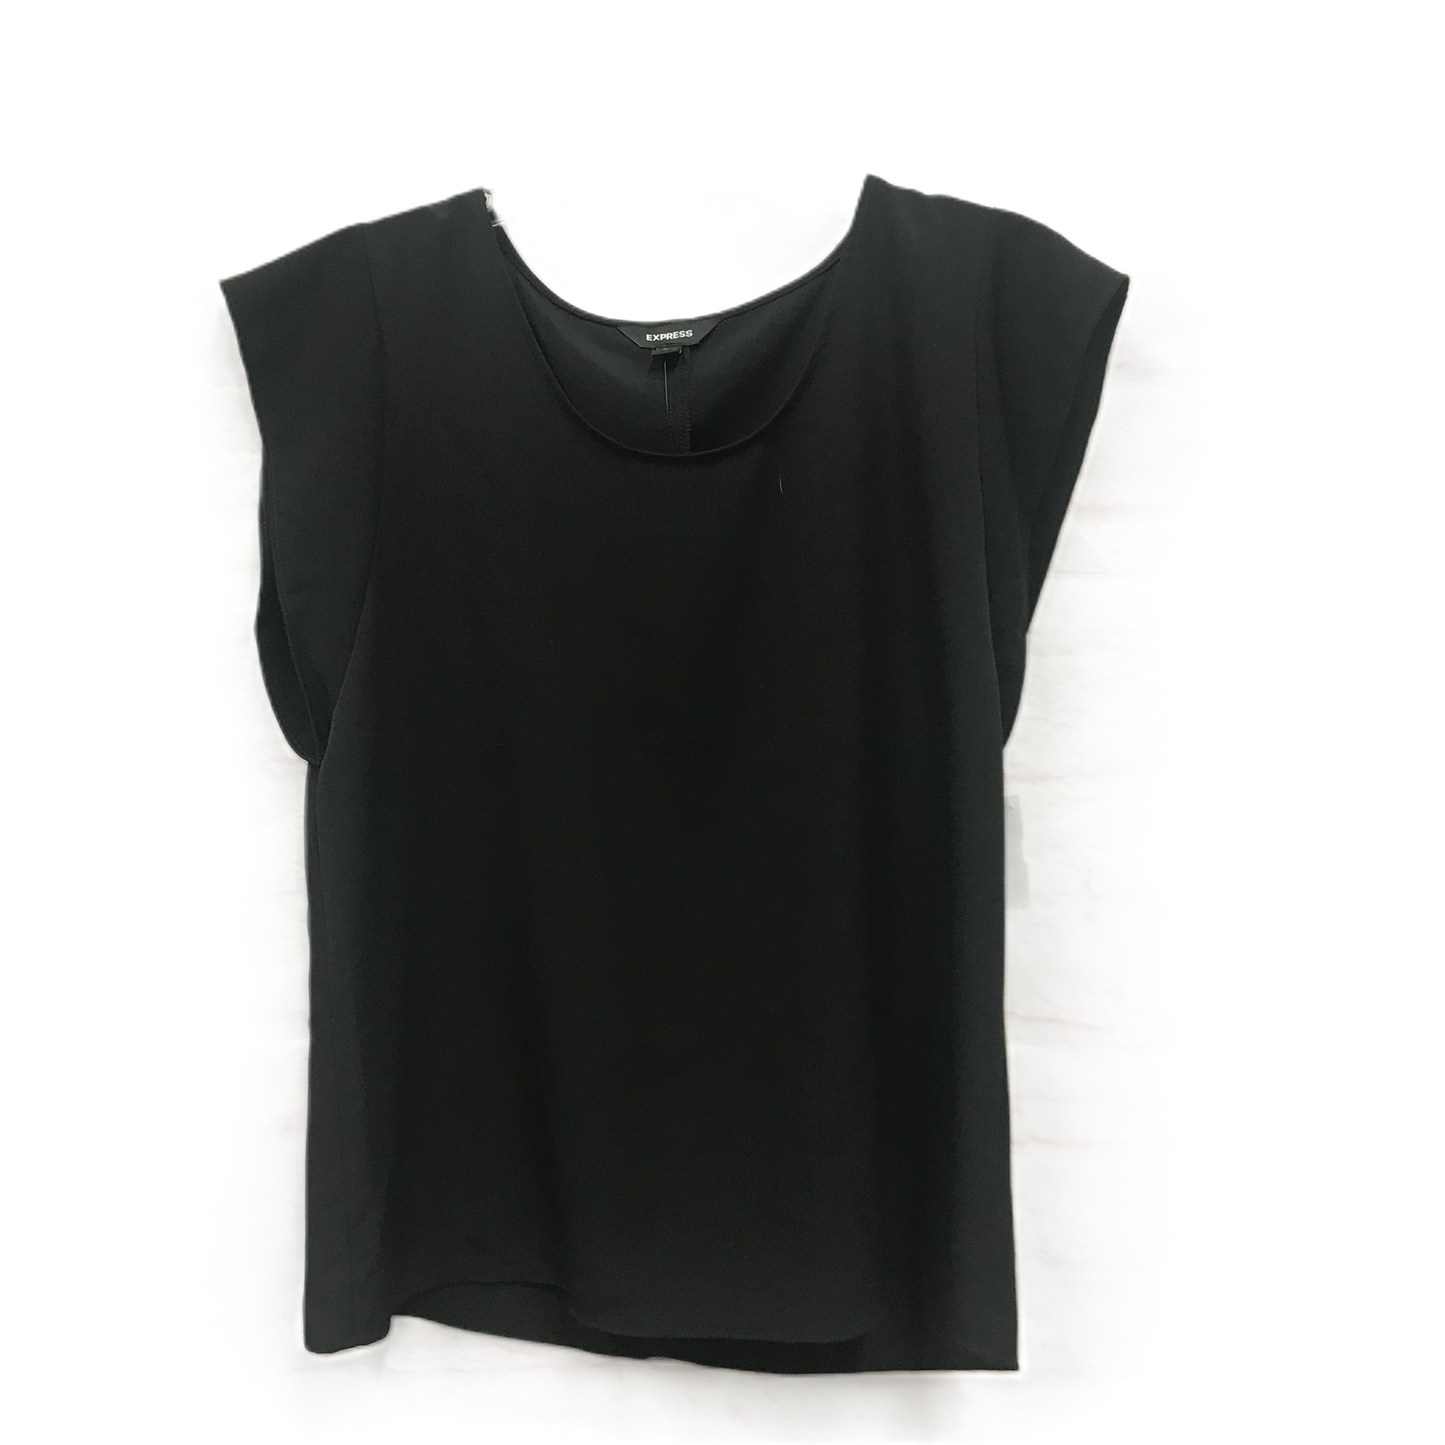 Black Top Short Sleeve By Express, Size: M